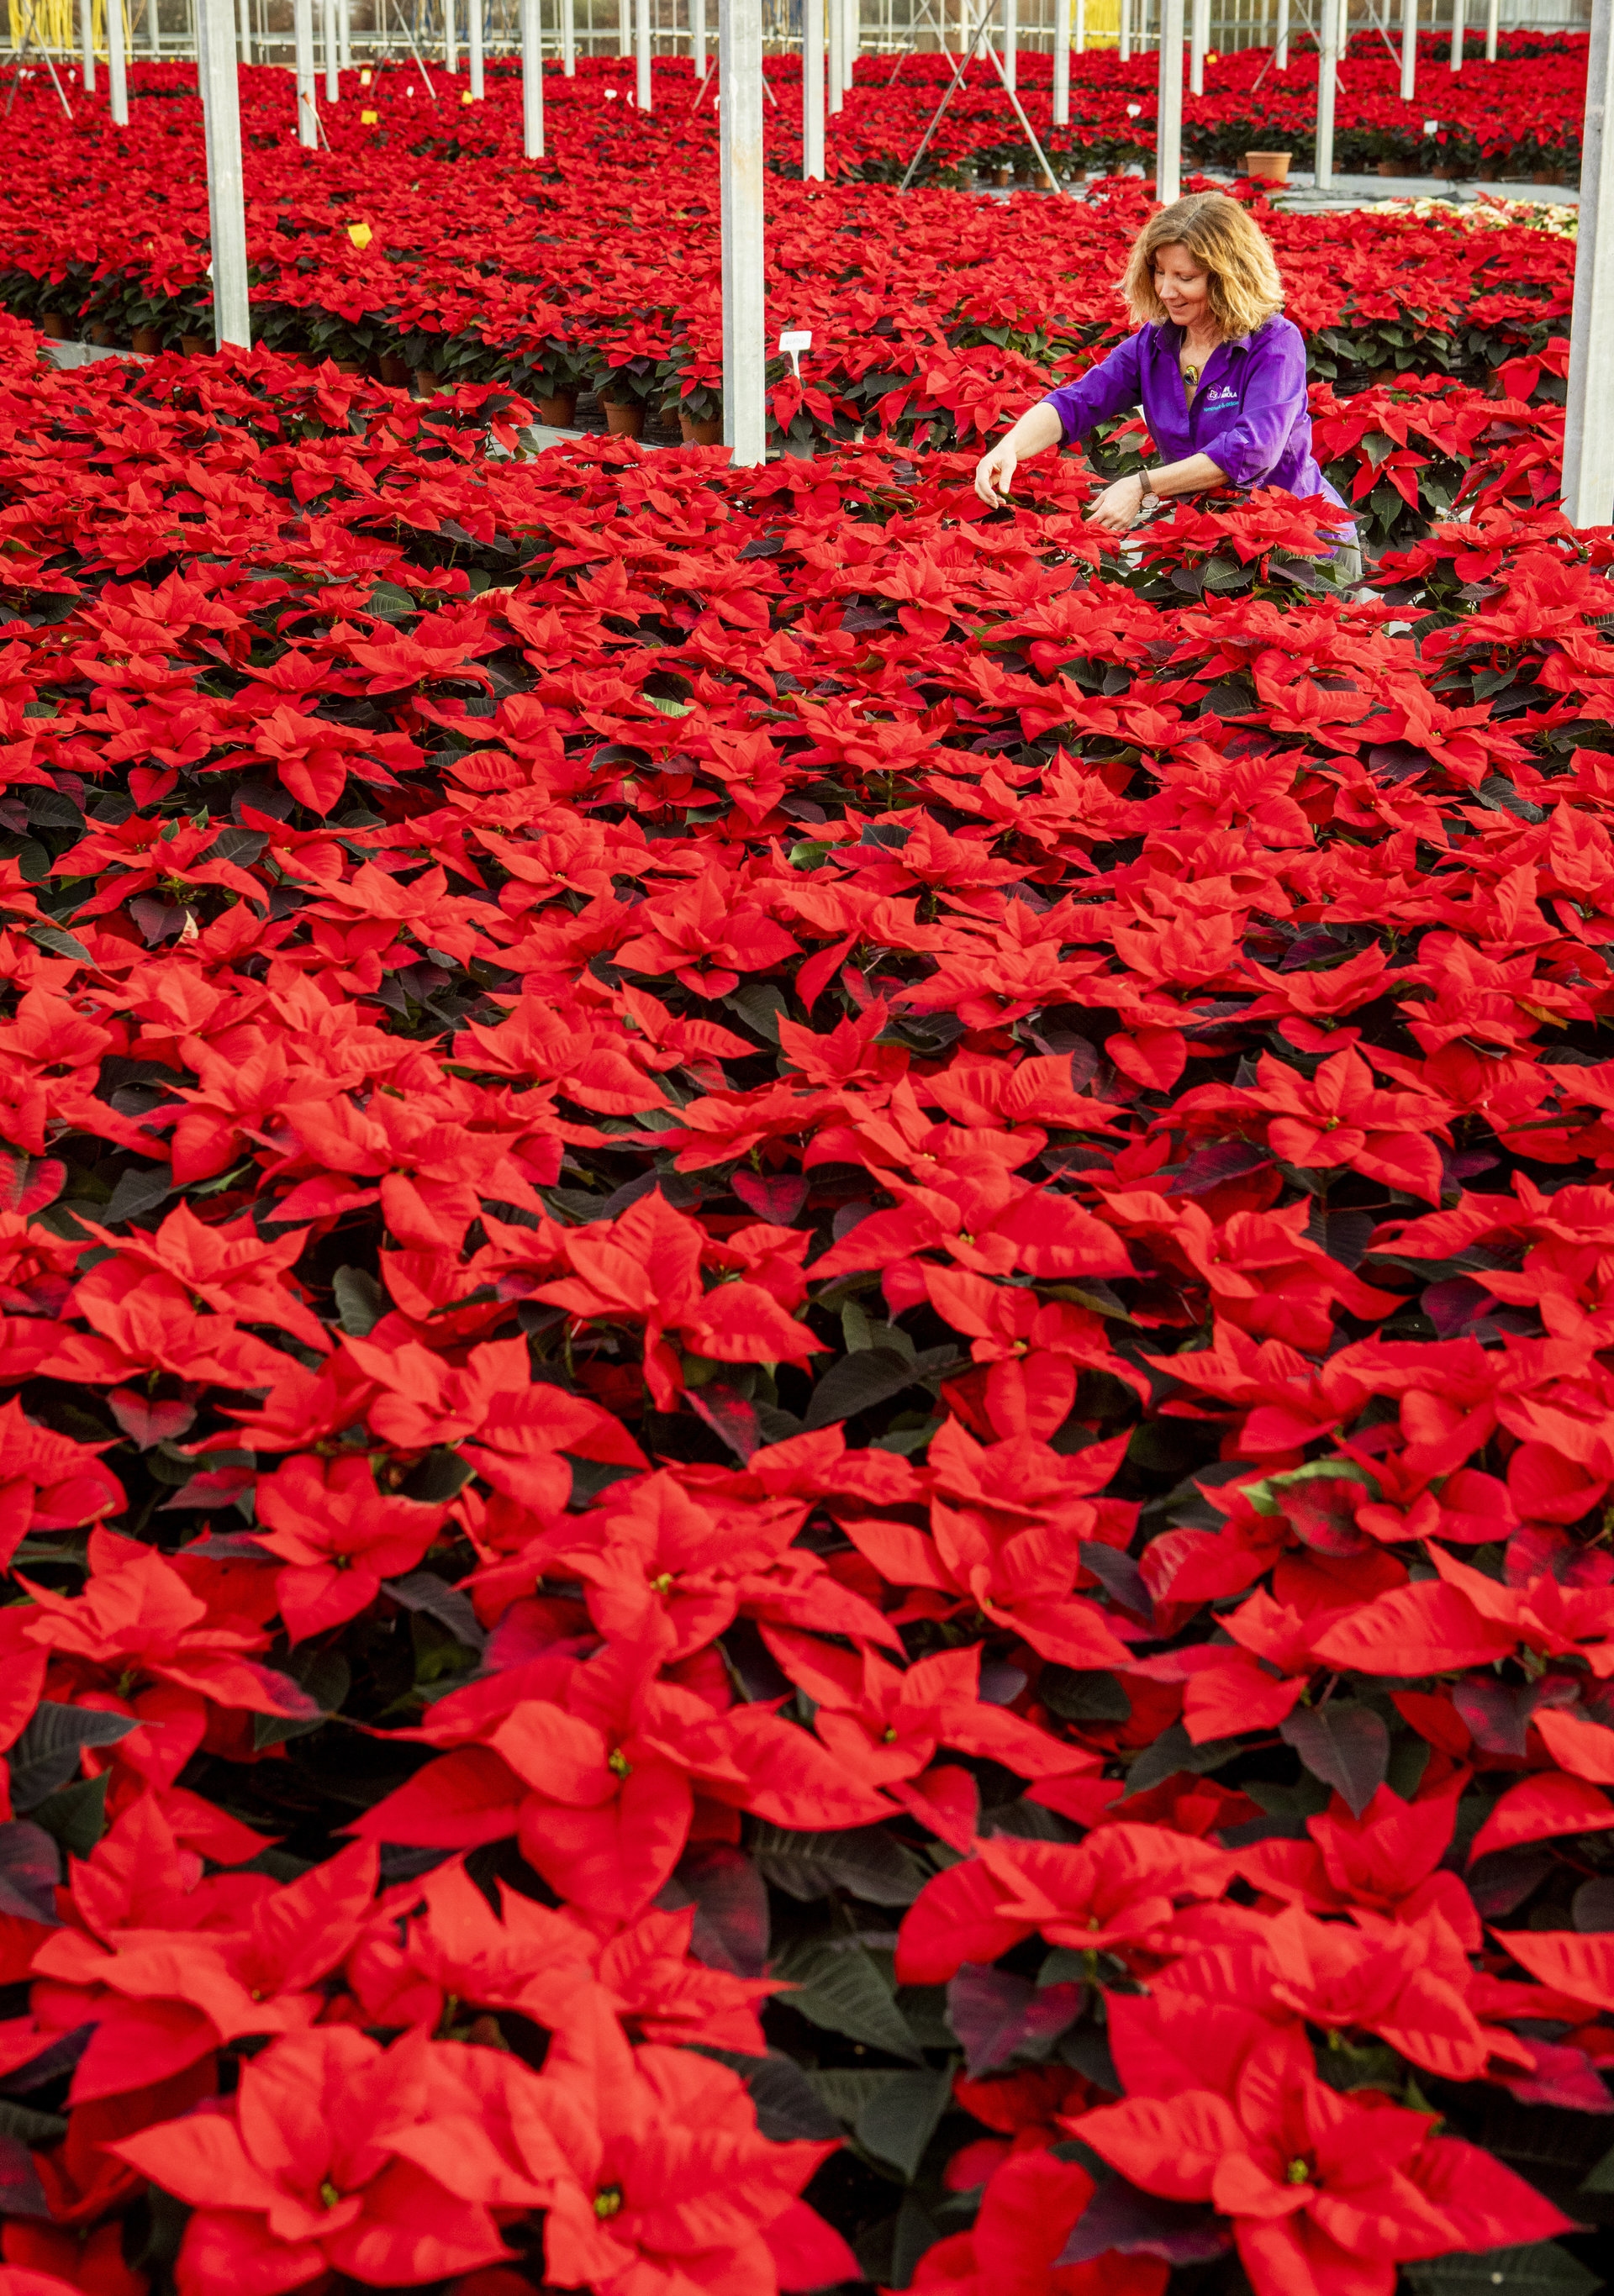 Carolyn Spray's team have grown more than 60,000 bright red poinsettias.